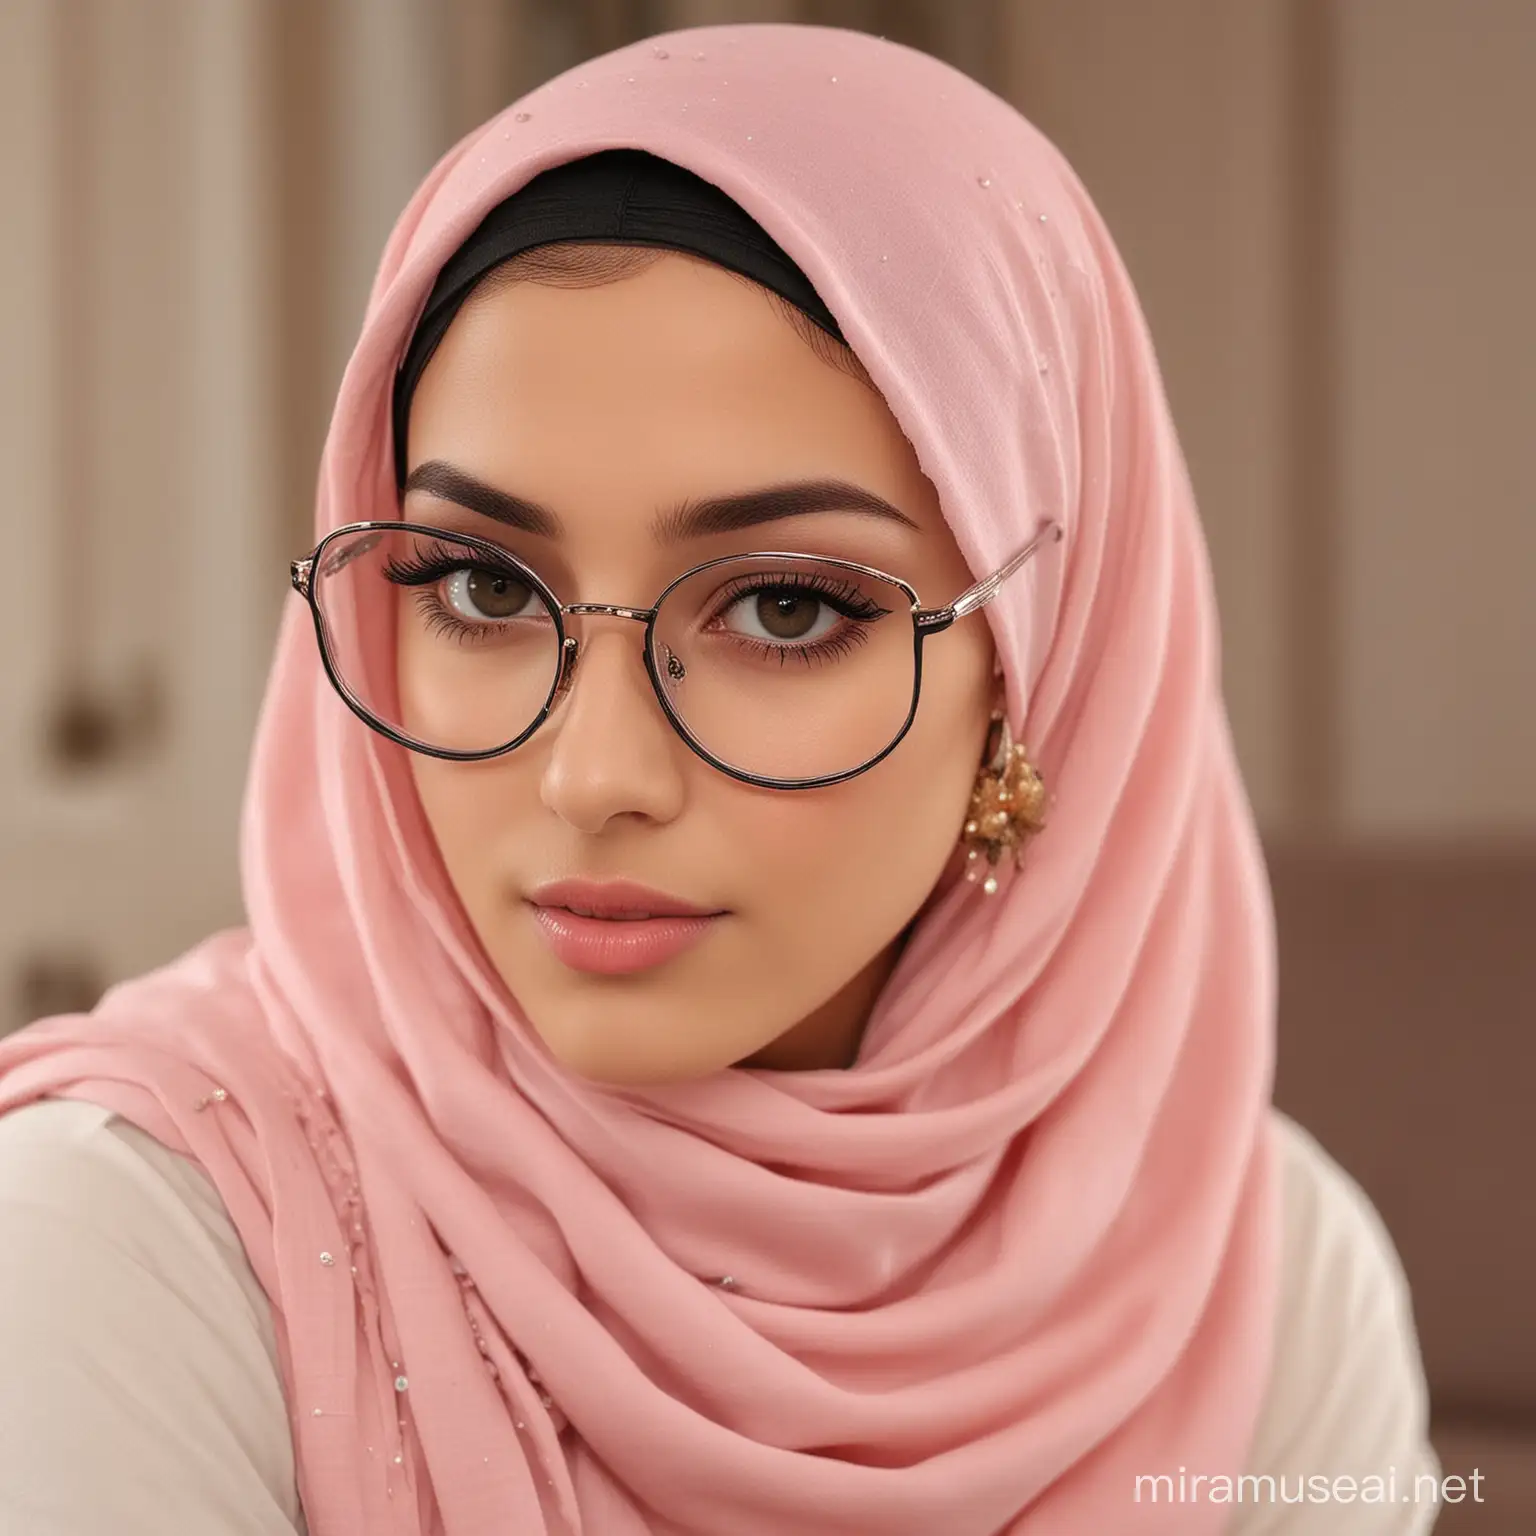 A Stunning Fair Skin Young Girl. With Long Eye Lashes And Rosy Chick. She is an arabic girl, She Wears A Stylist Hijab, she wears an earing. She Wears A Cat Eye Spectacles. She sits on the sofa of her luxurious living room, she's looking At The Camera, the image must be as humanly realistic as possible. Apply high definition